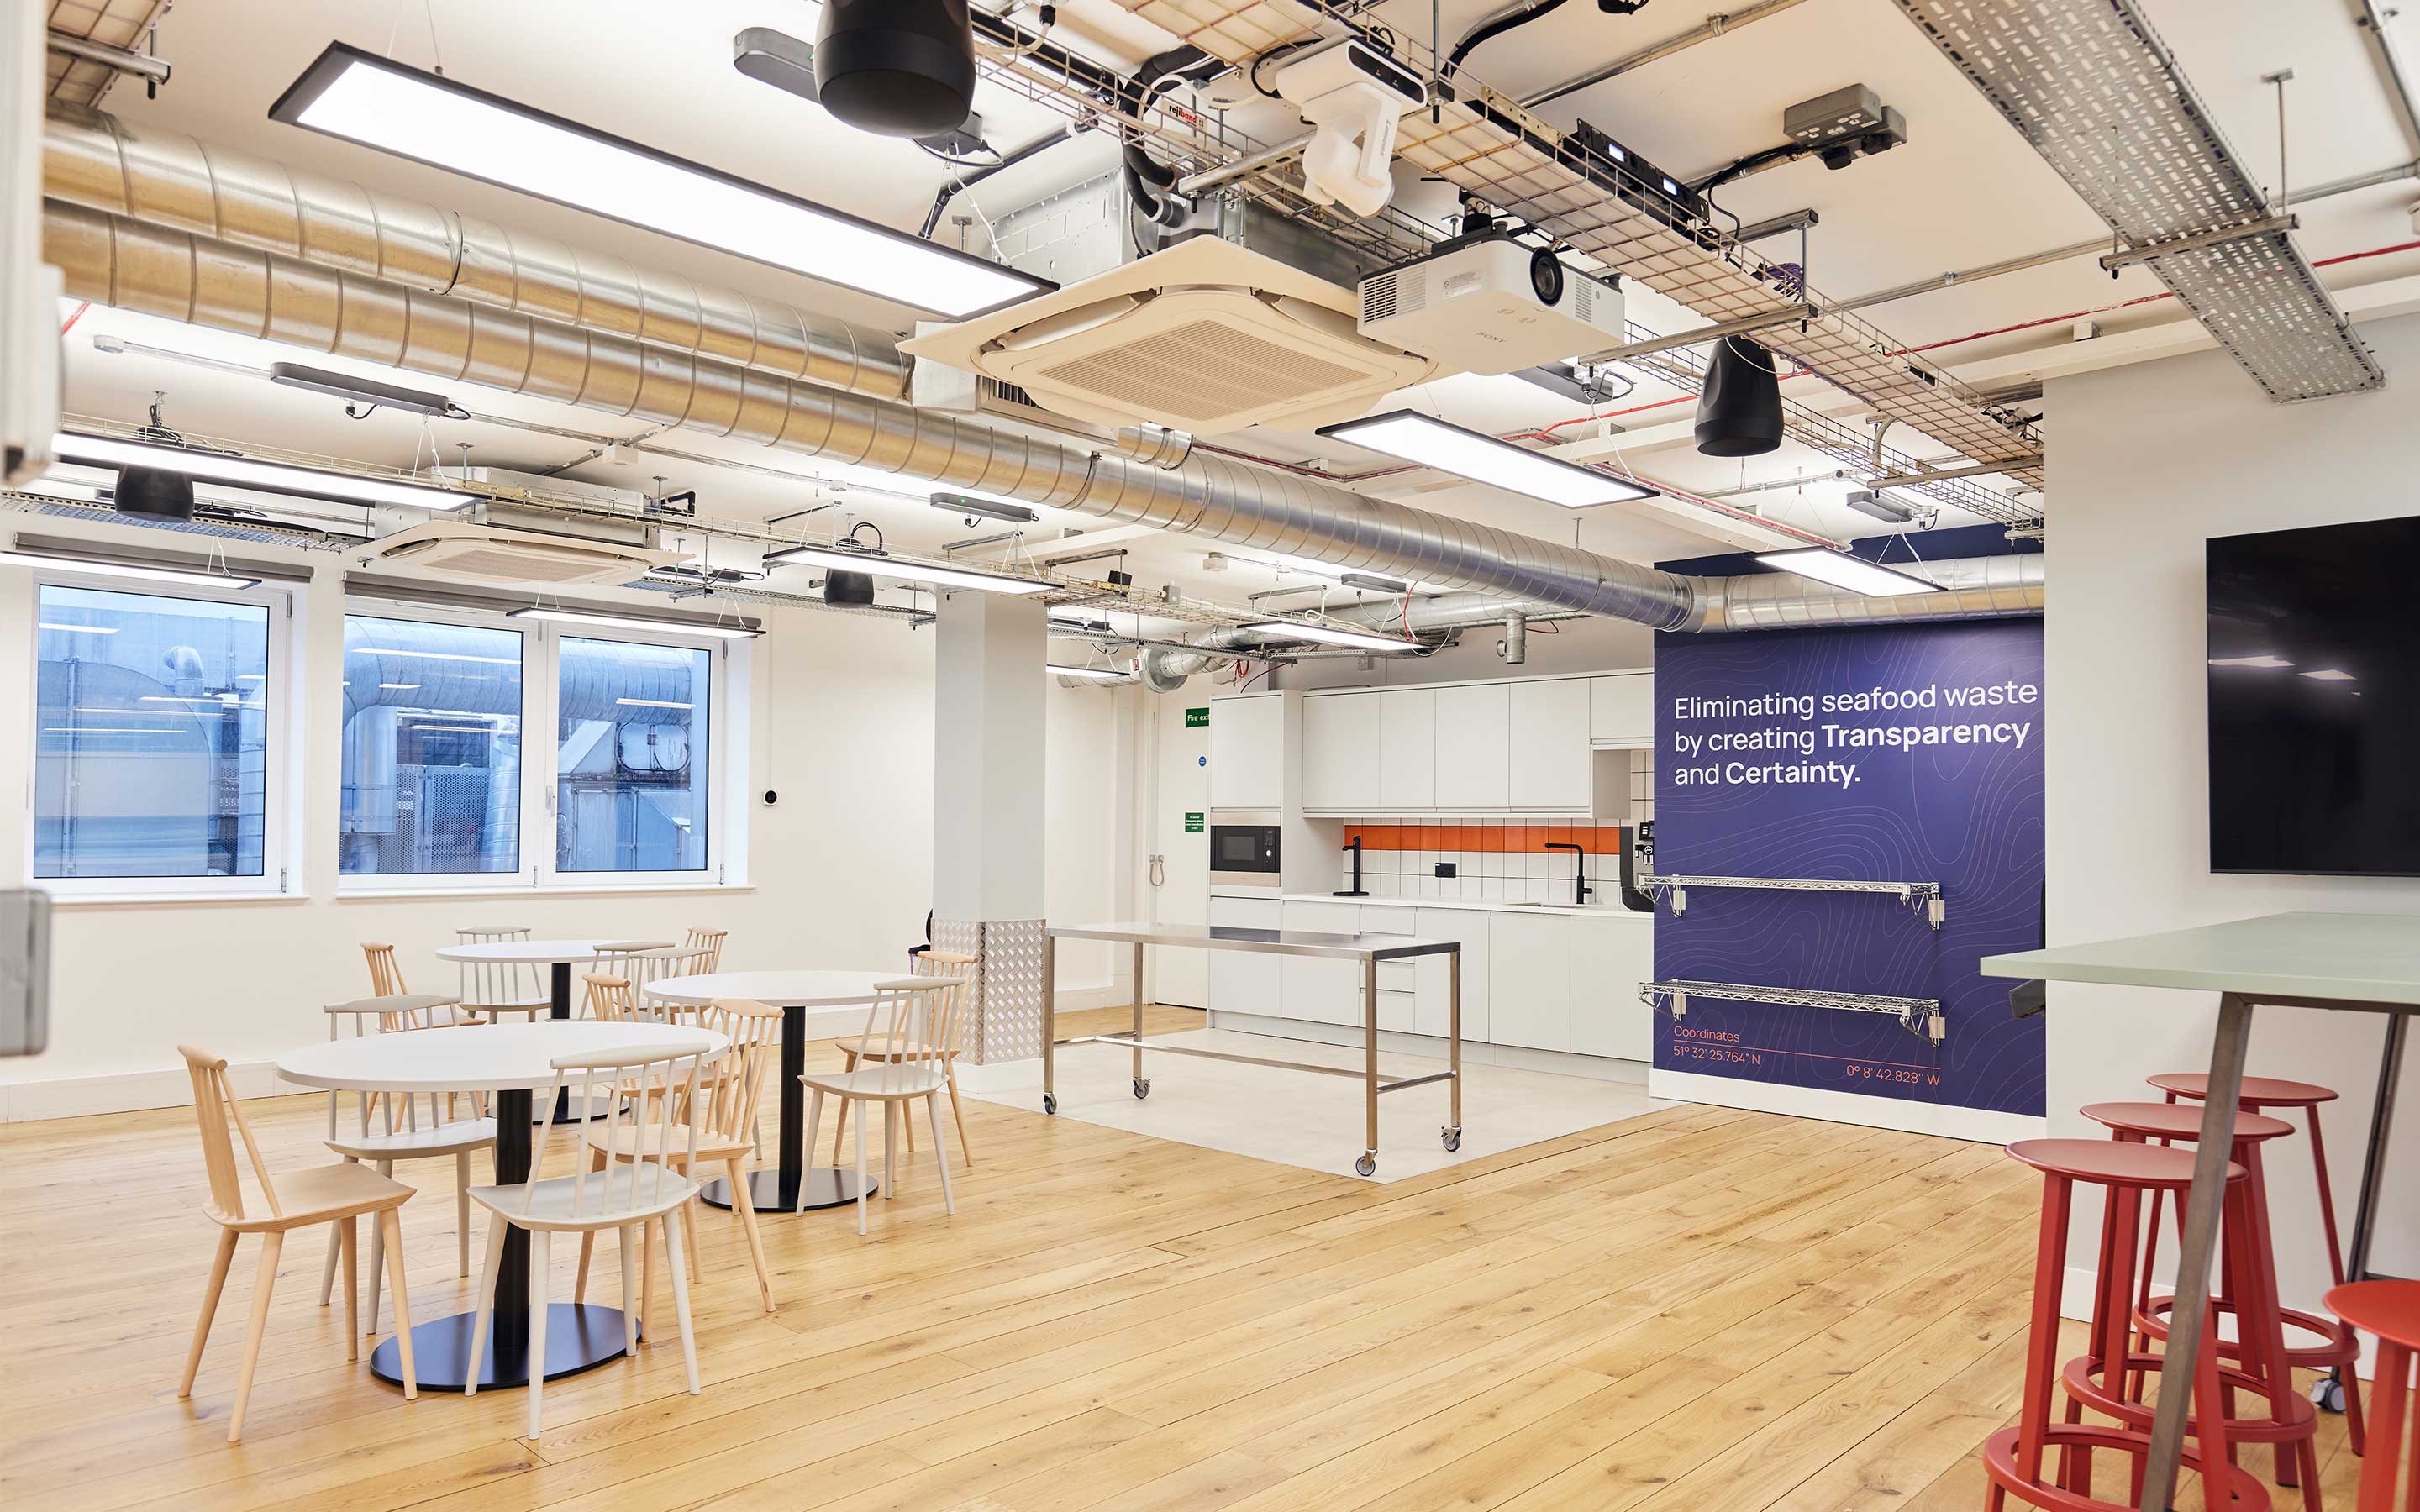 A bright office teapoint area with breakout tables, exposed ceiling services, and a navy blue manifestation wall with company slogan